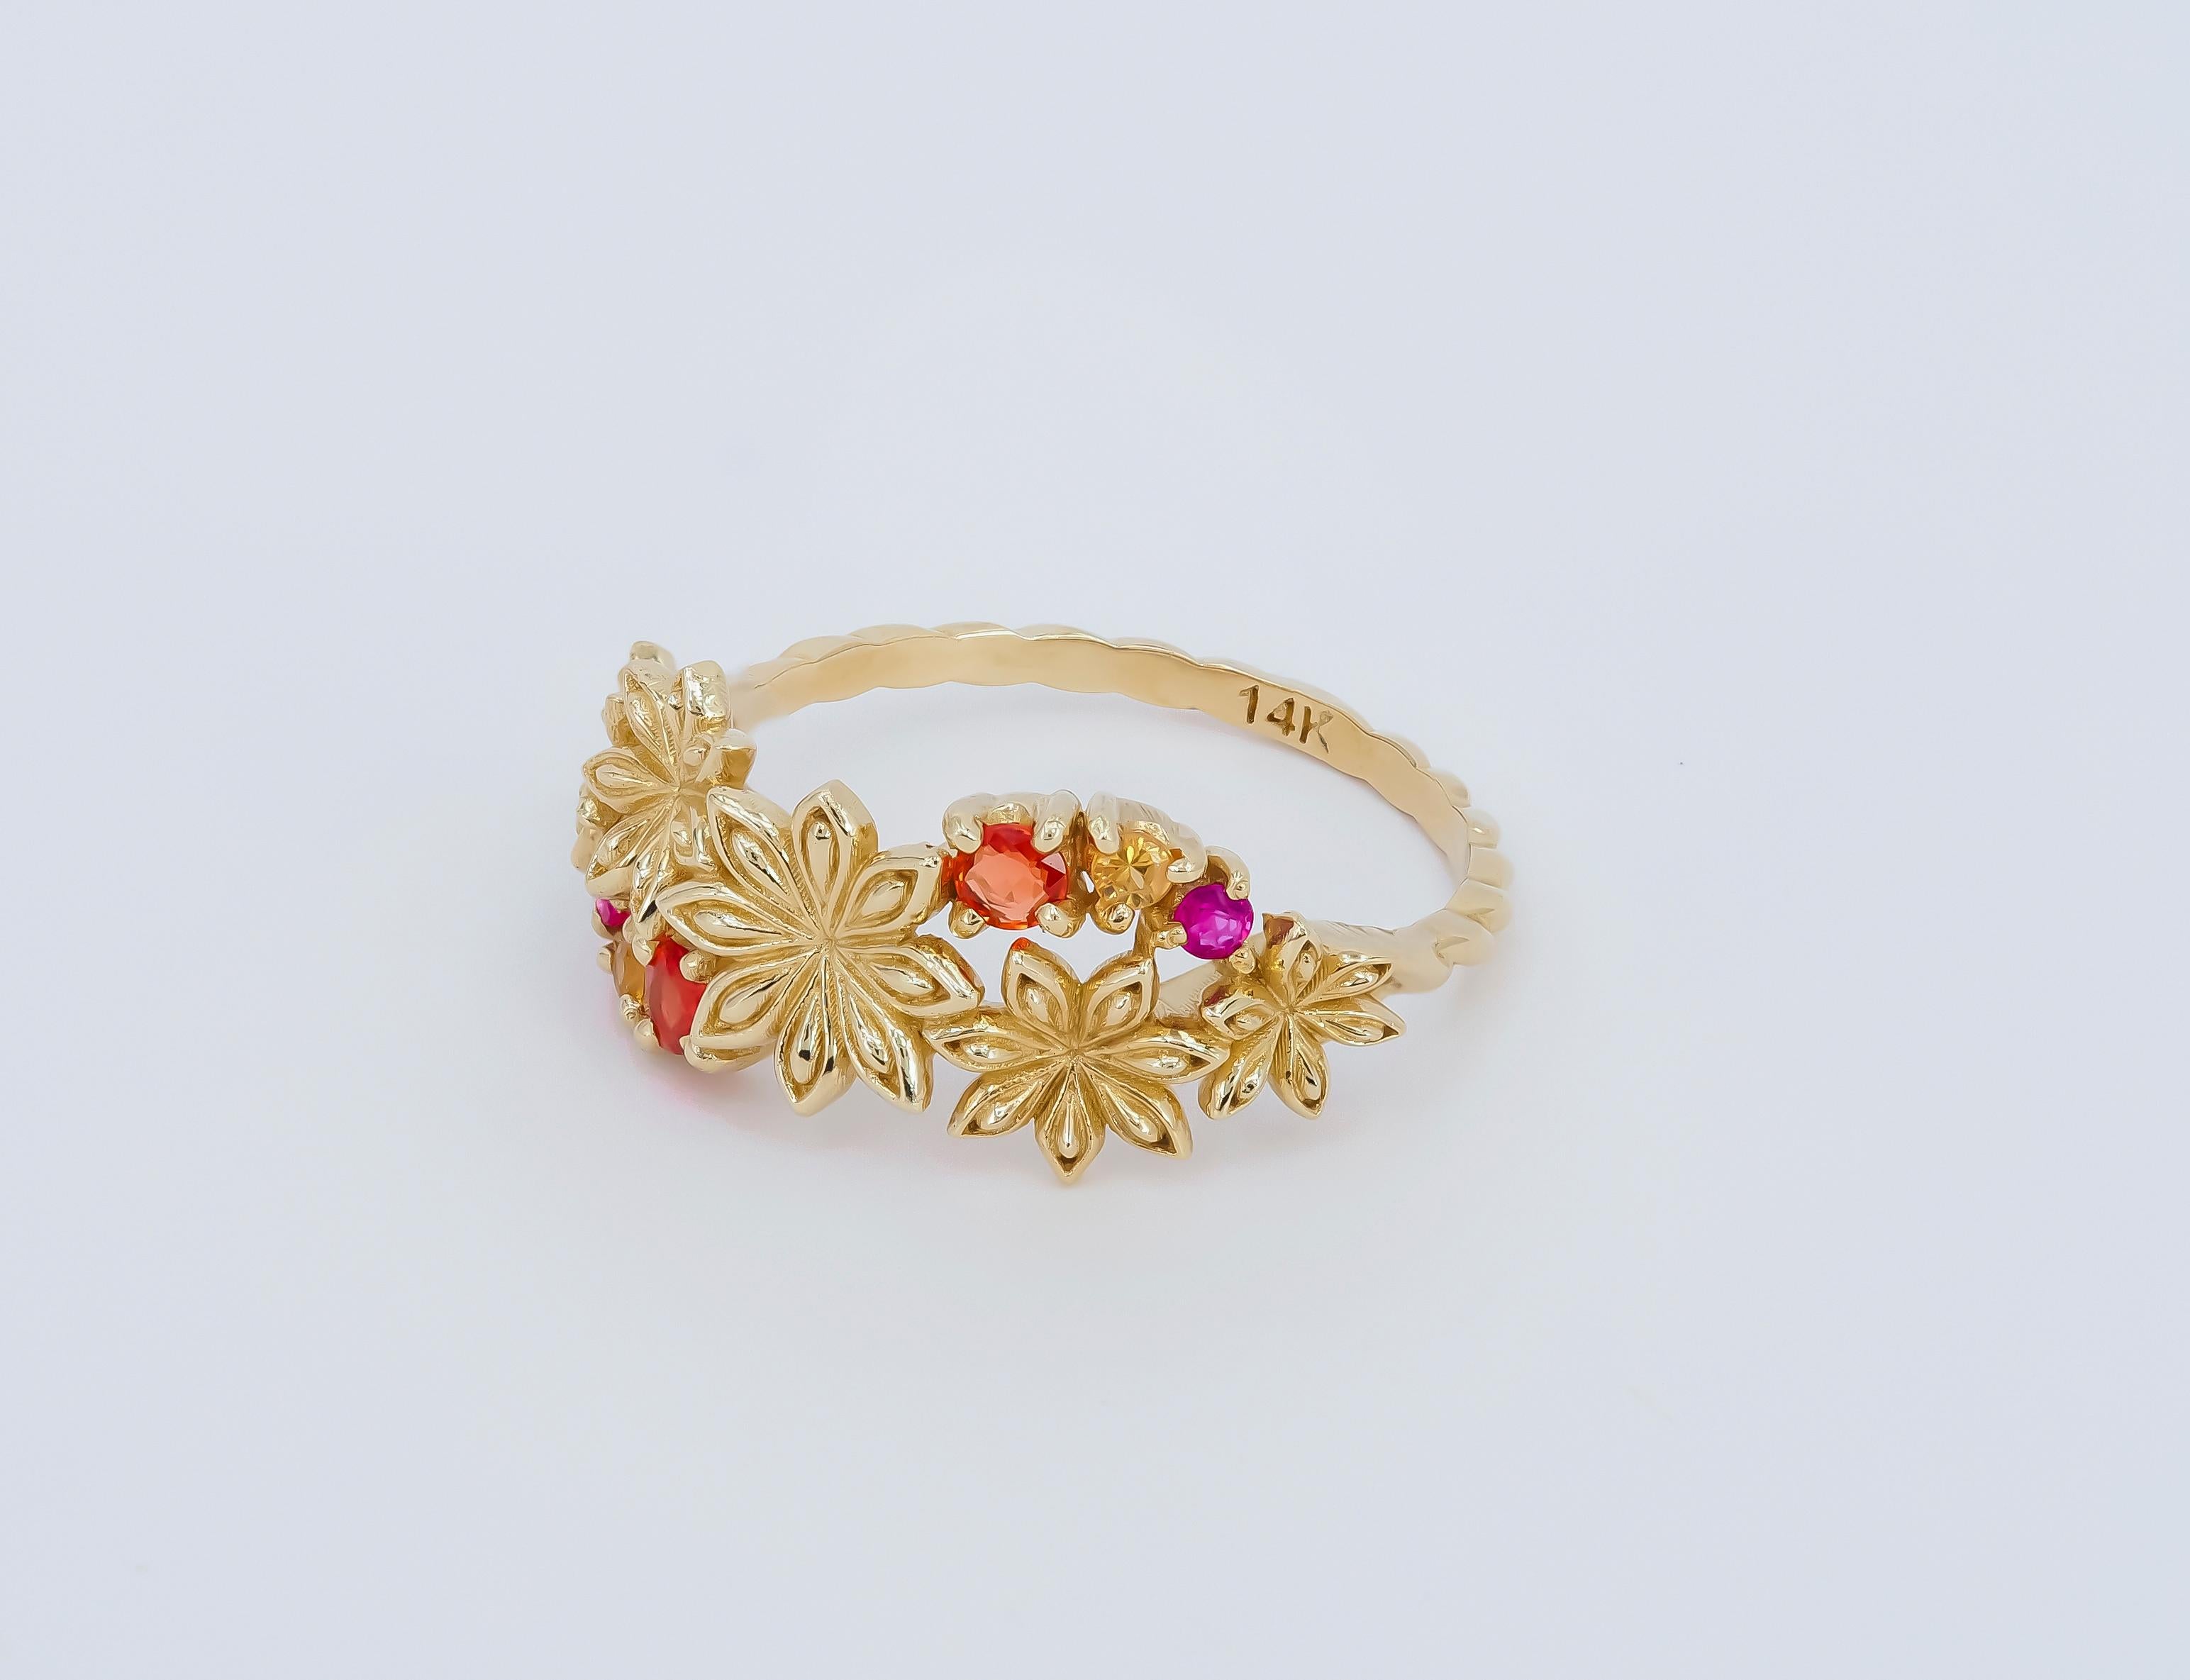 For Sale:  14k Gold Ring with Sapphires and Amethysts, Star Anise Flower Gold Ring. 4